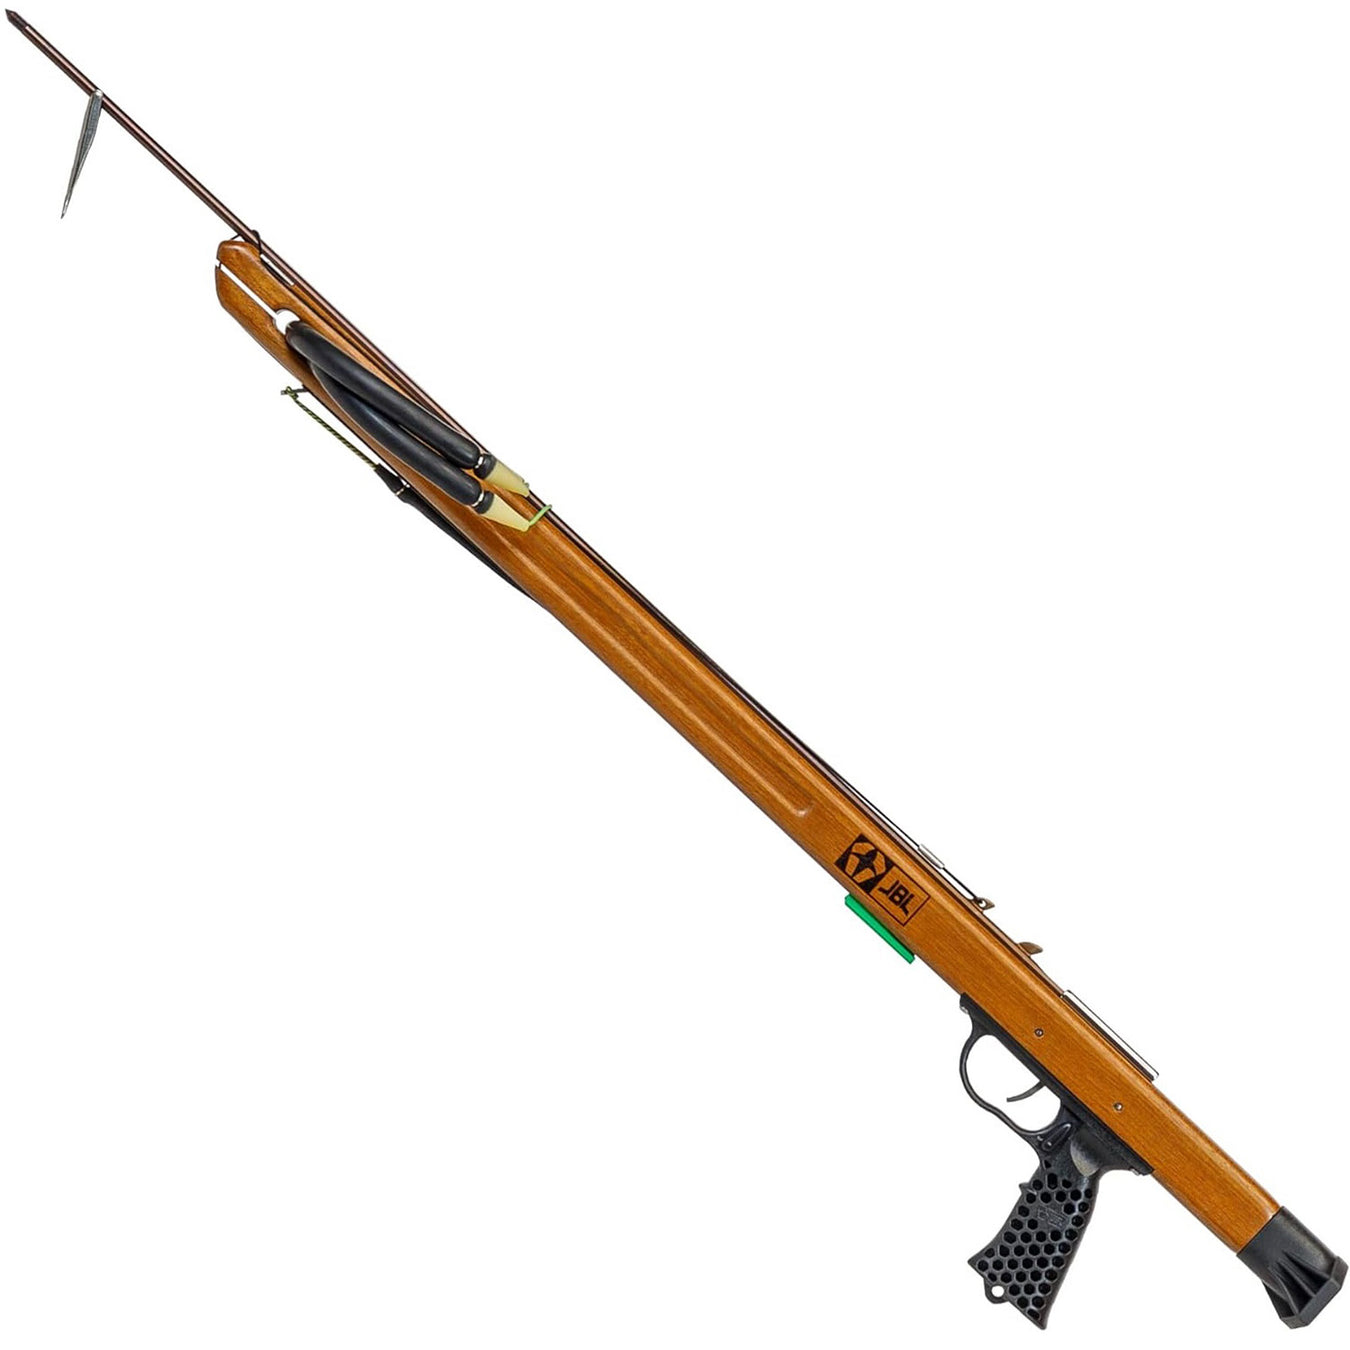 Wooden Spearguns for Spearfishing